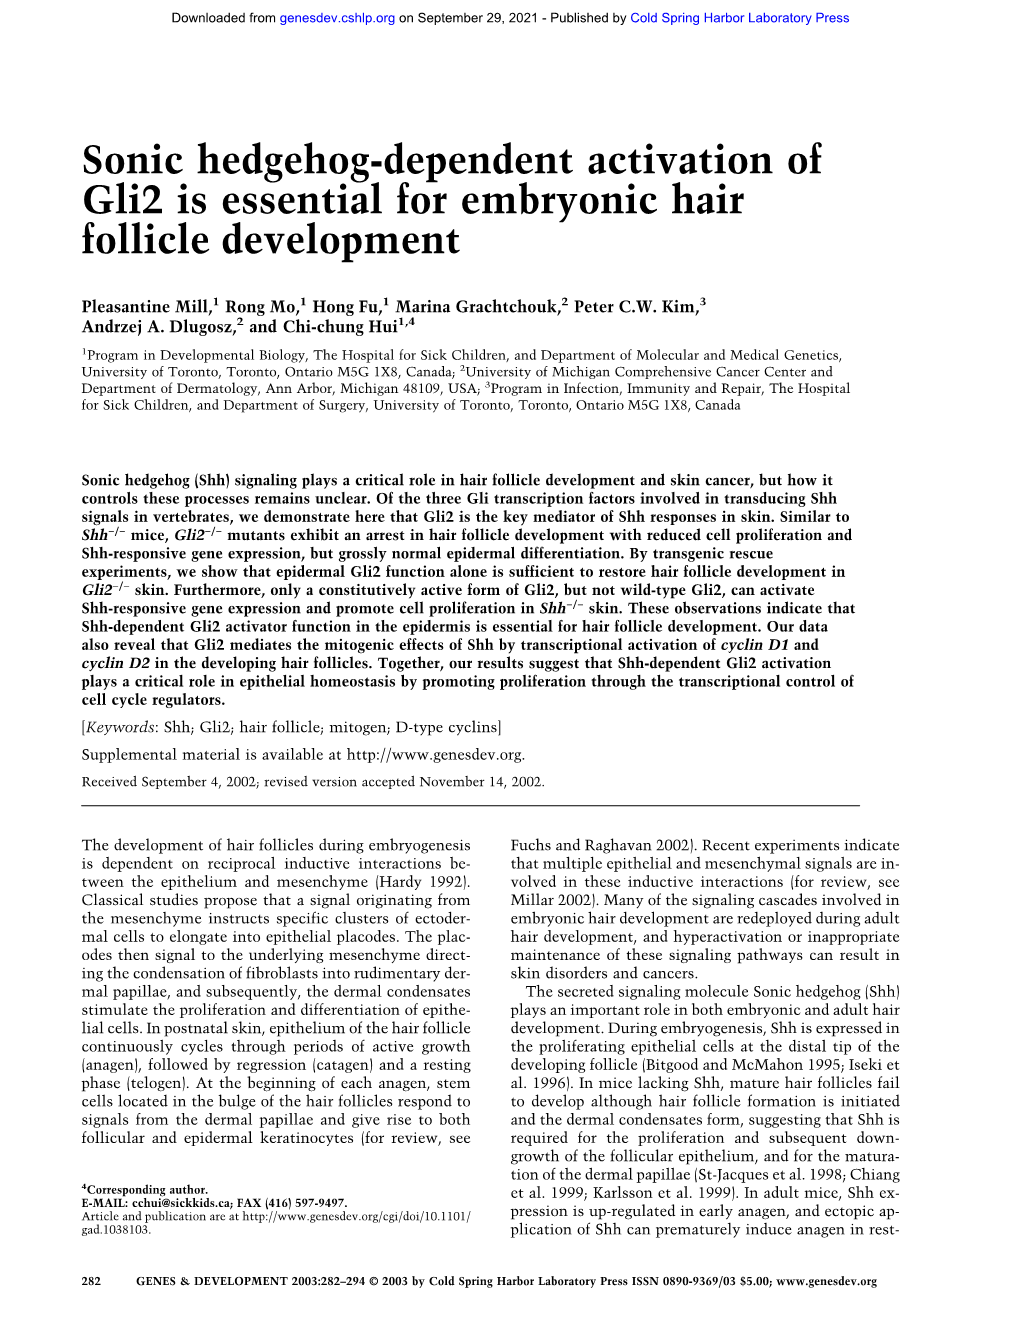 Sonic Hedgehog-Dependent Activation of Gli2 Is Essential for Embryonic Hair Follicle Development